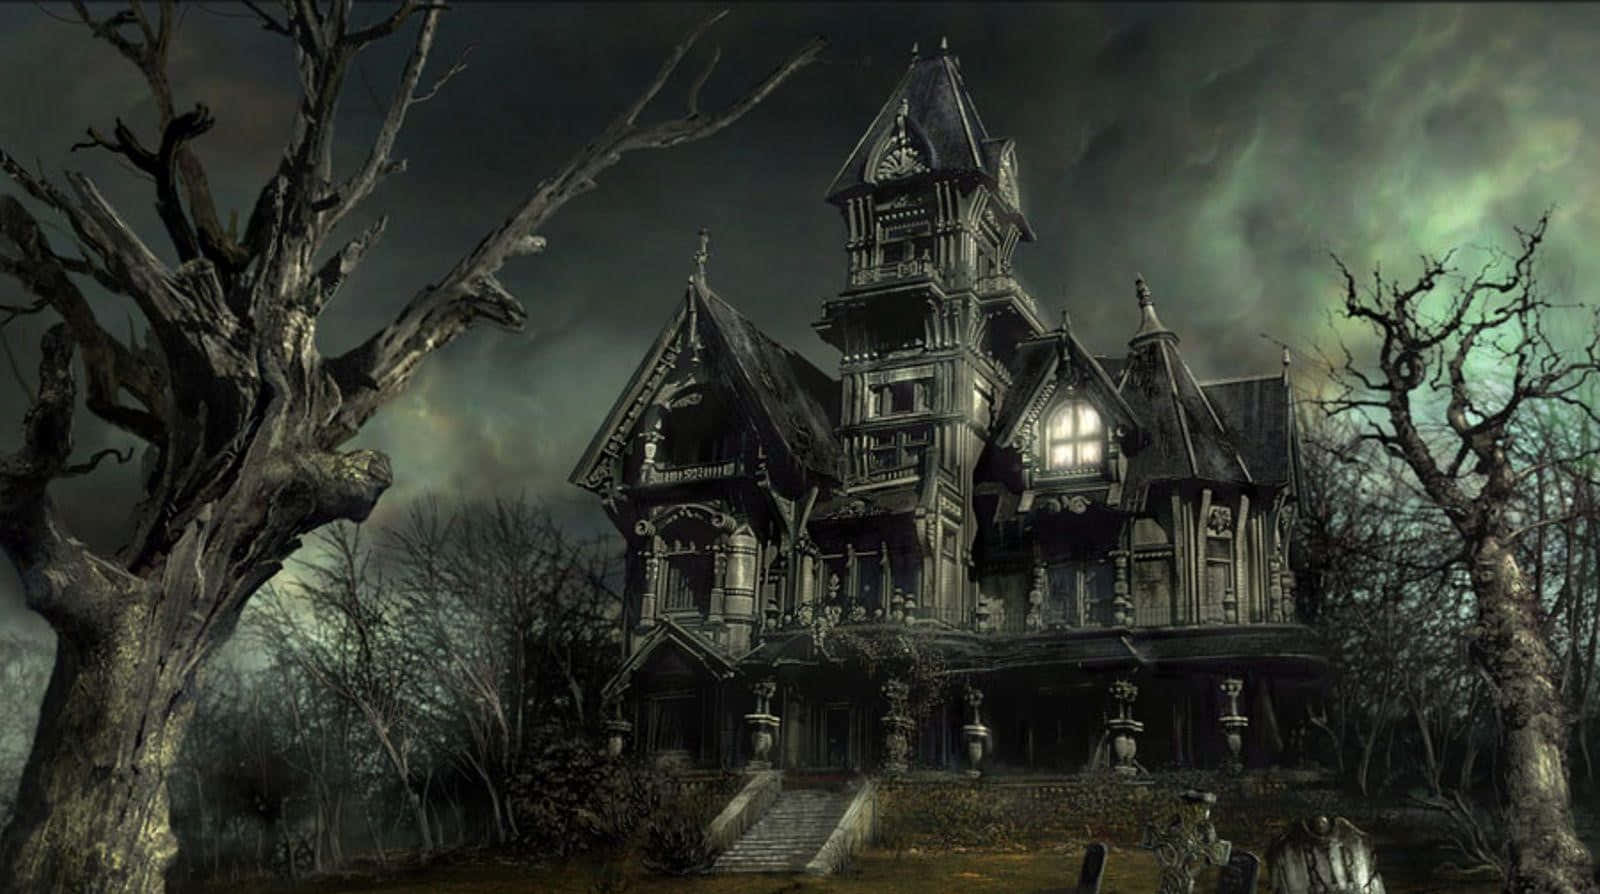 The Haunted House is Awaiting Adventurers